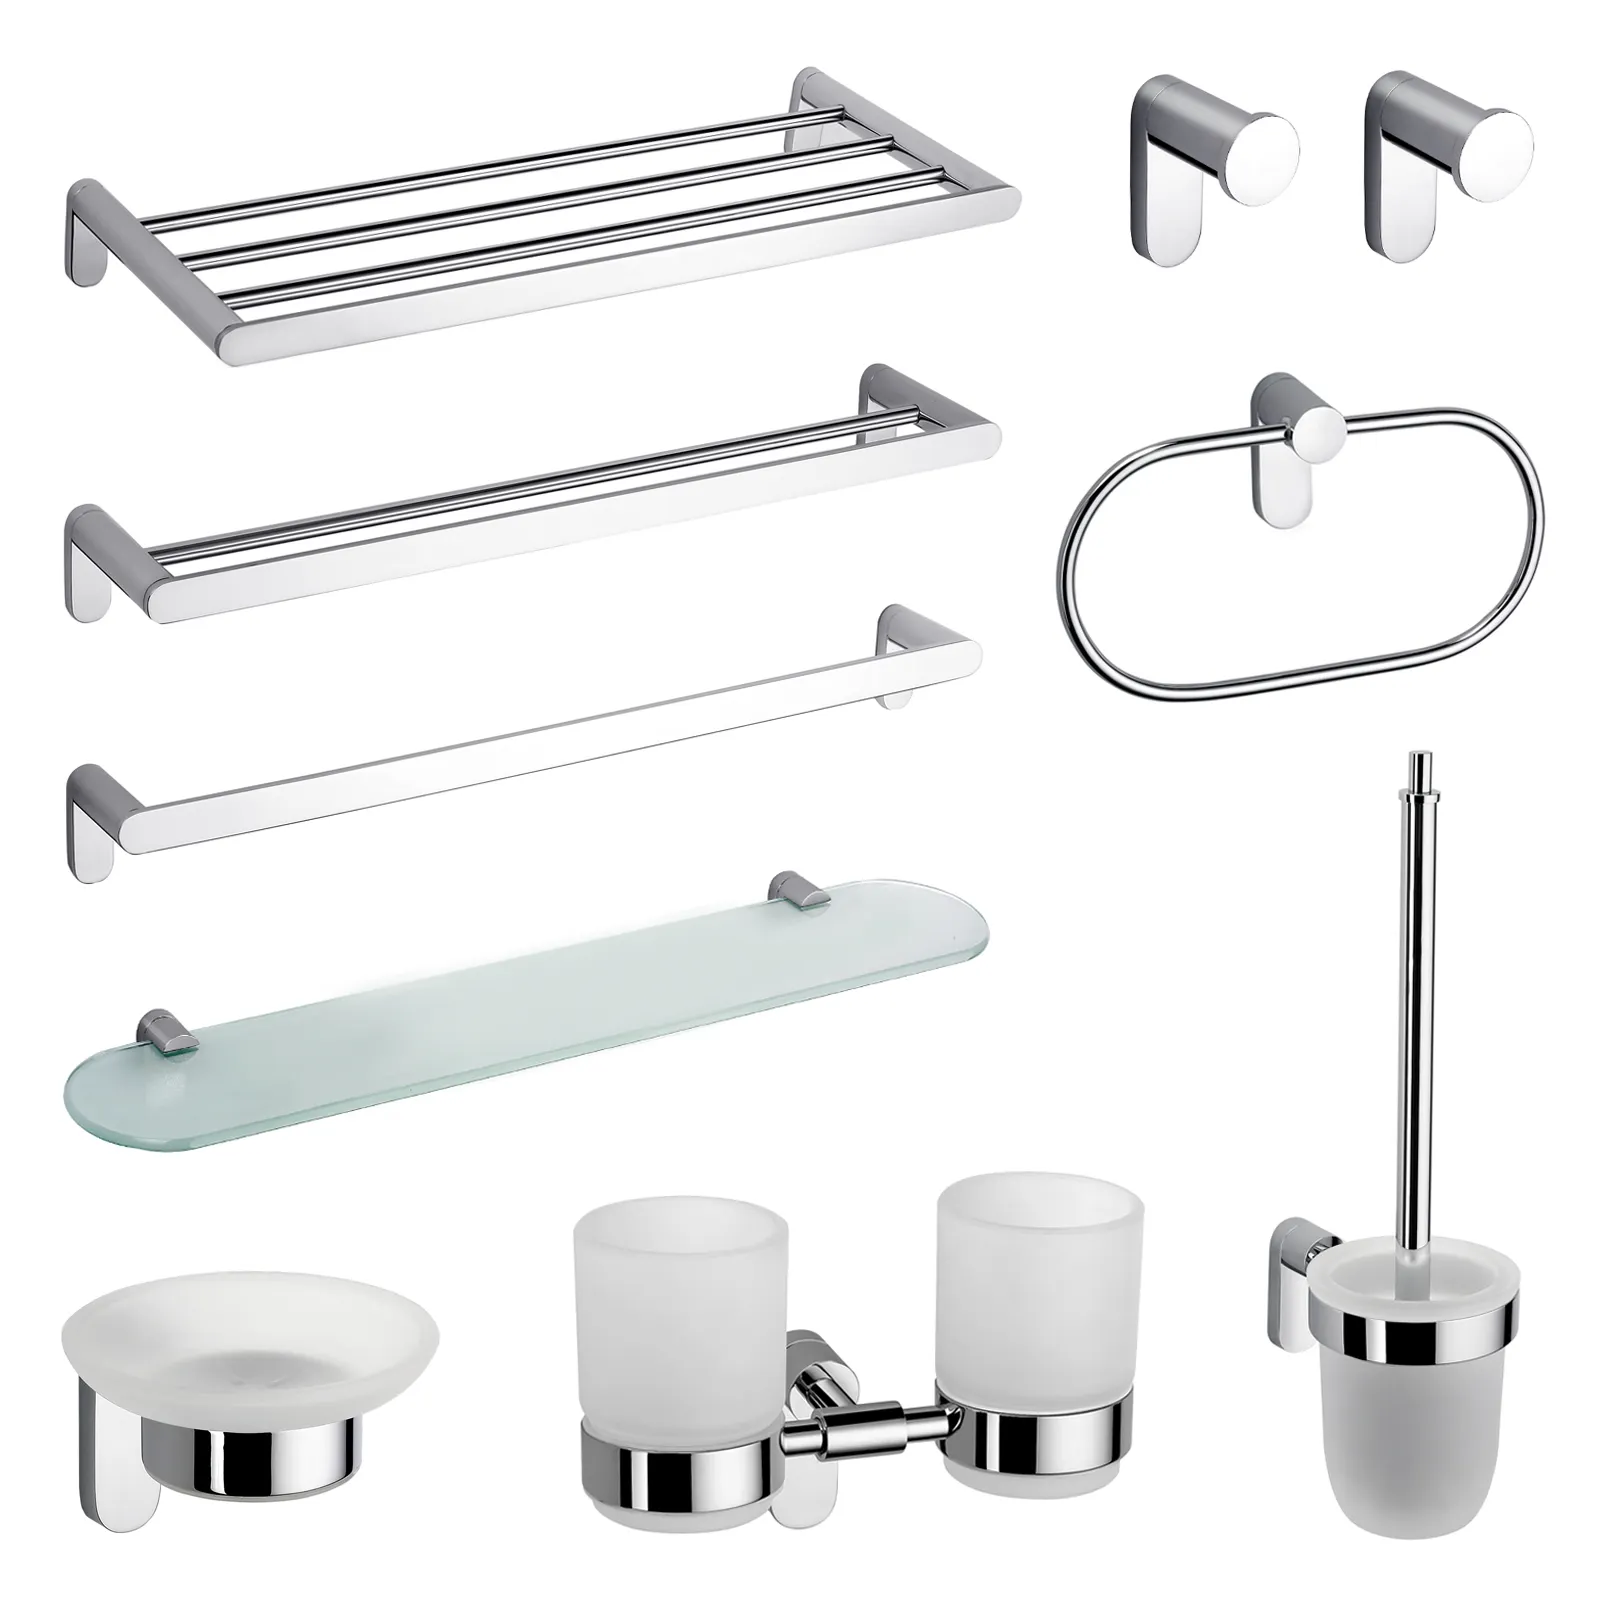 Modern Design Bathroom Hardware Sets Luxury Wall Mounted High Quality Hotel Sanitary Ware Accessories Kit Chrome